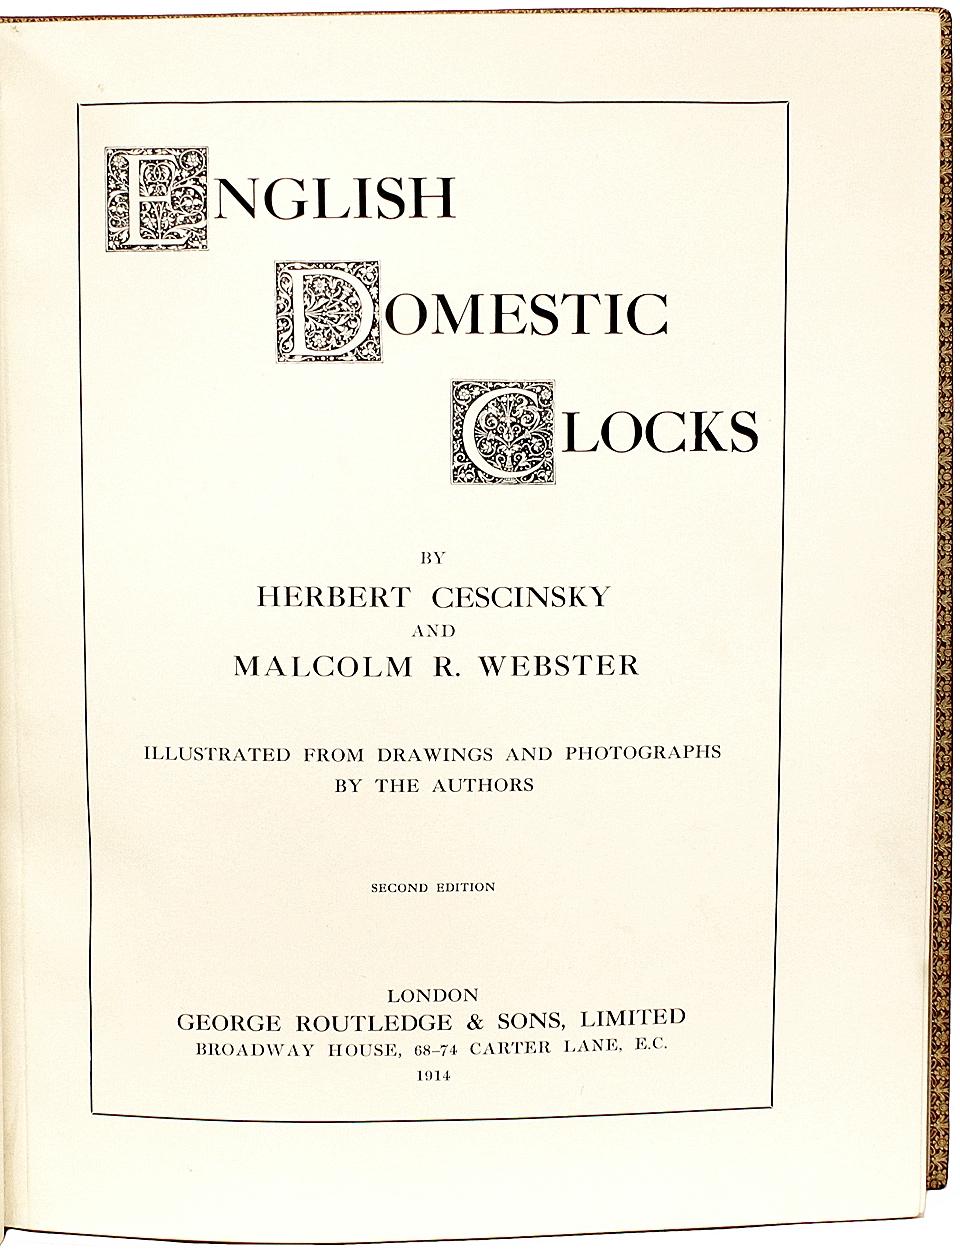 American CESCINSKY & Webster. English Domestic Clocks. SECOND EDITION. 1914 For Sale